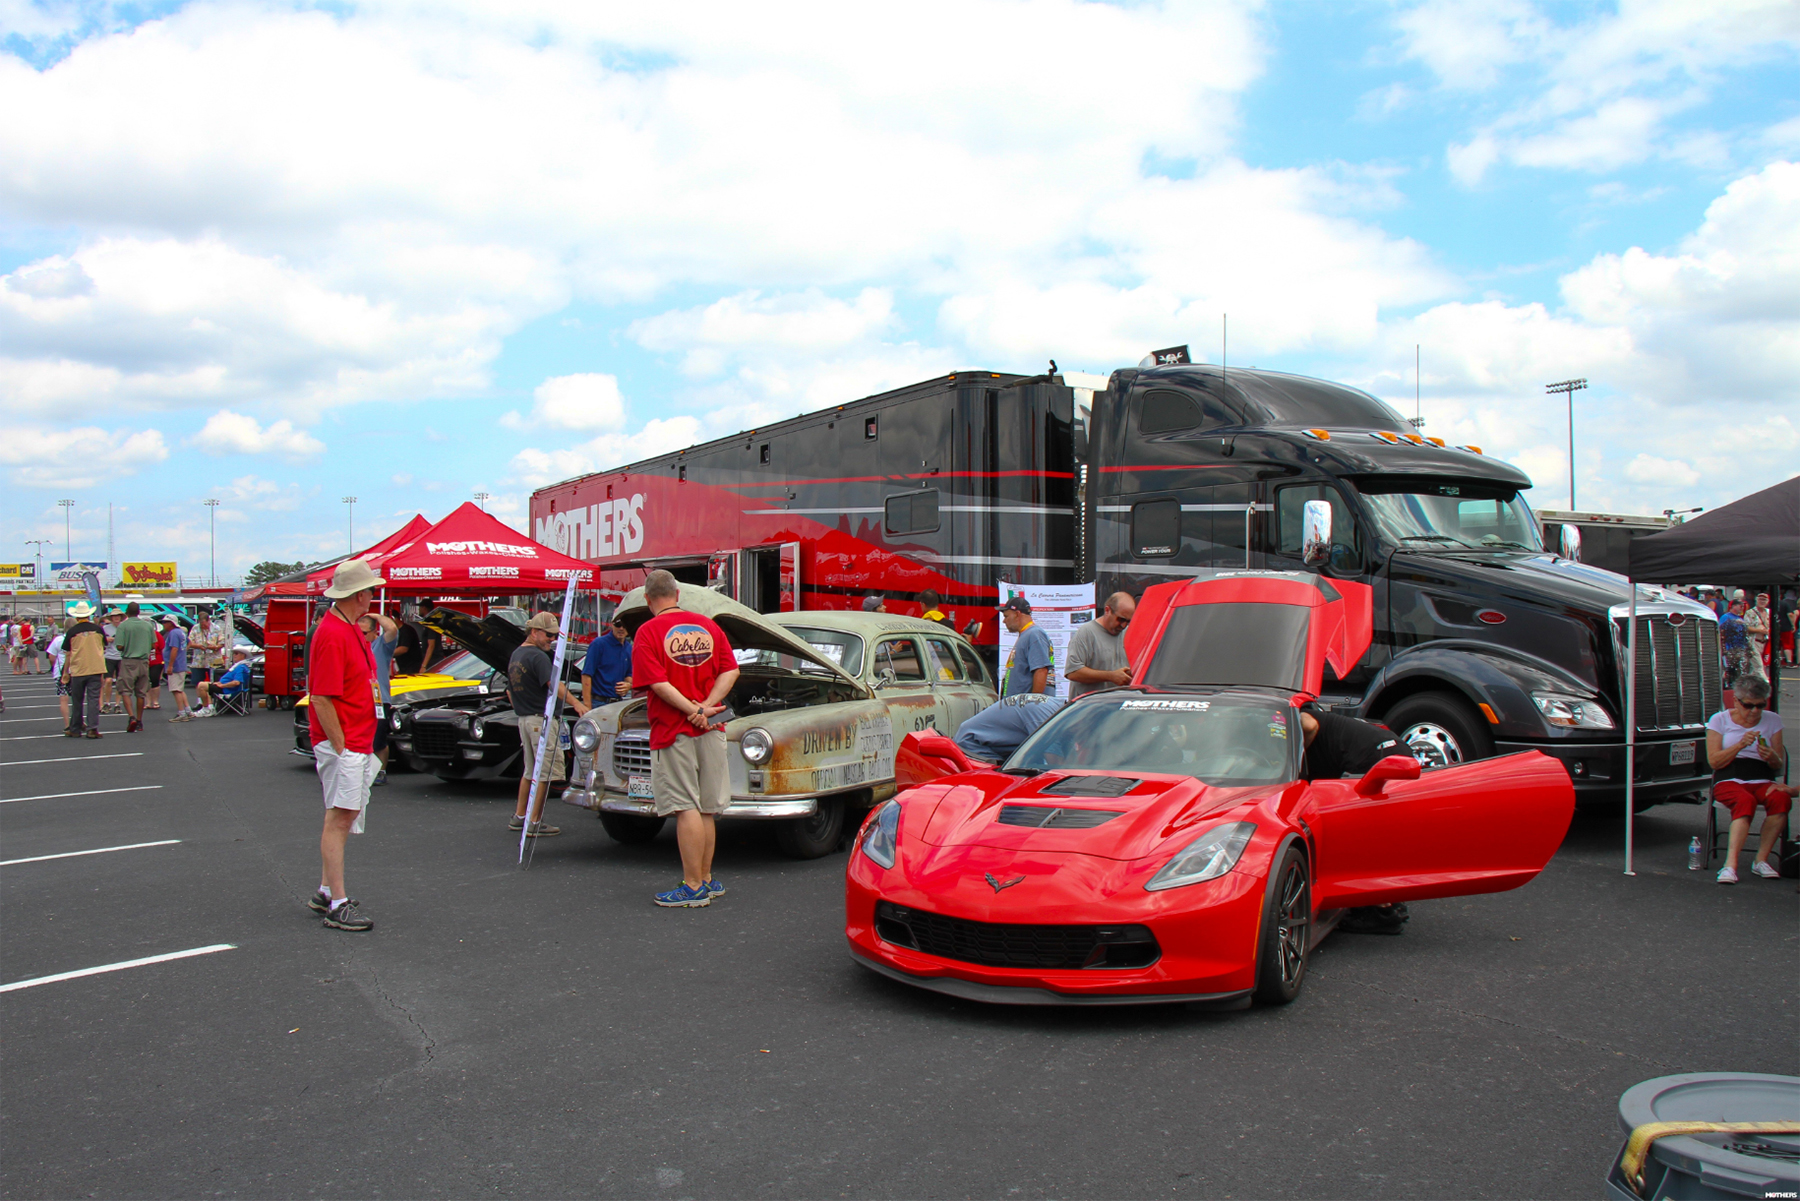 Callaway AeroWagen™ on display at Mothers Polish Mobile Marketing Semi Truck and Trailer